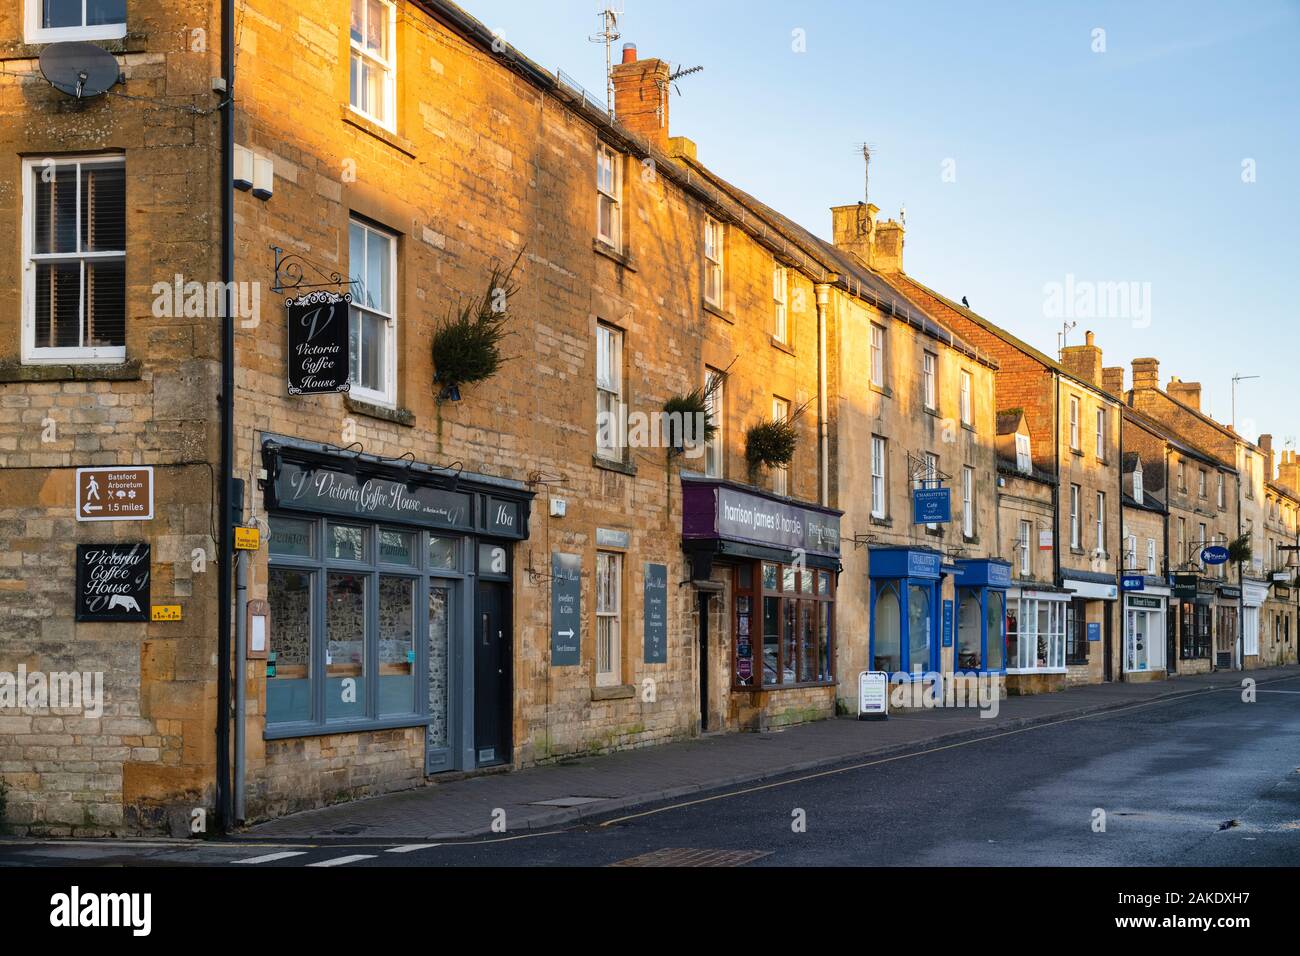 Moreton in Marsh High Street am Weihnachtstag morgen, Cotswolds, Gloucestershire, England Stockfoto